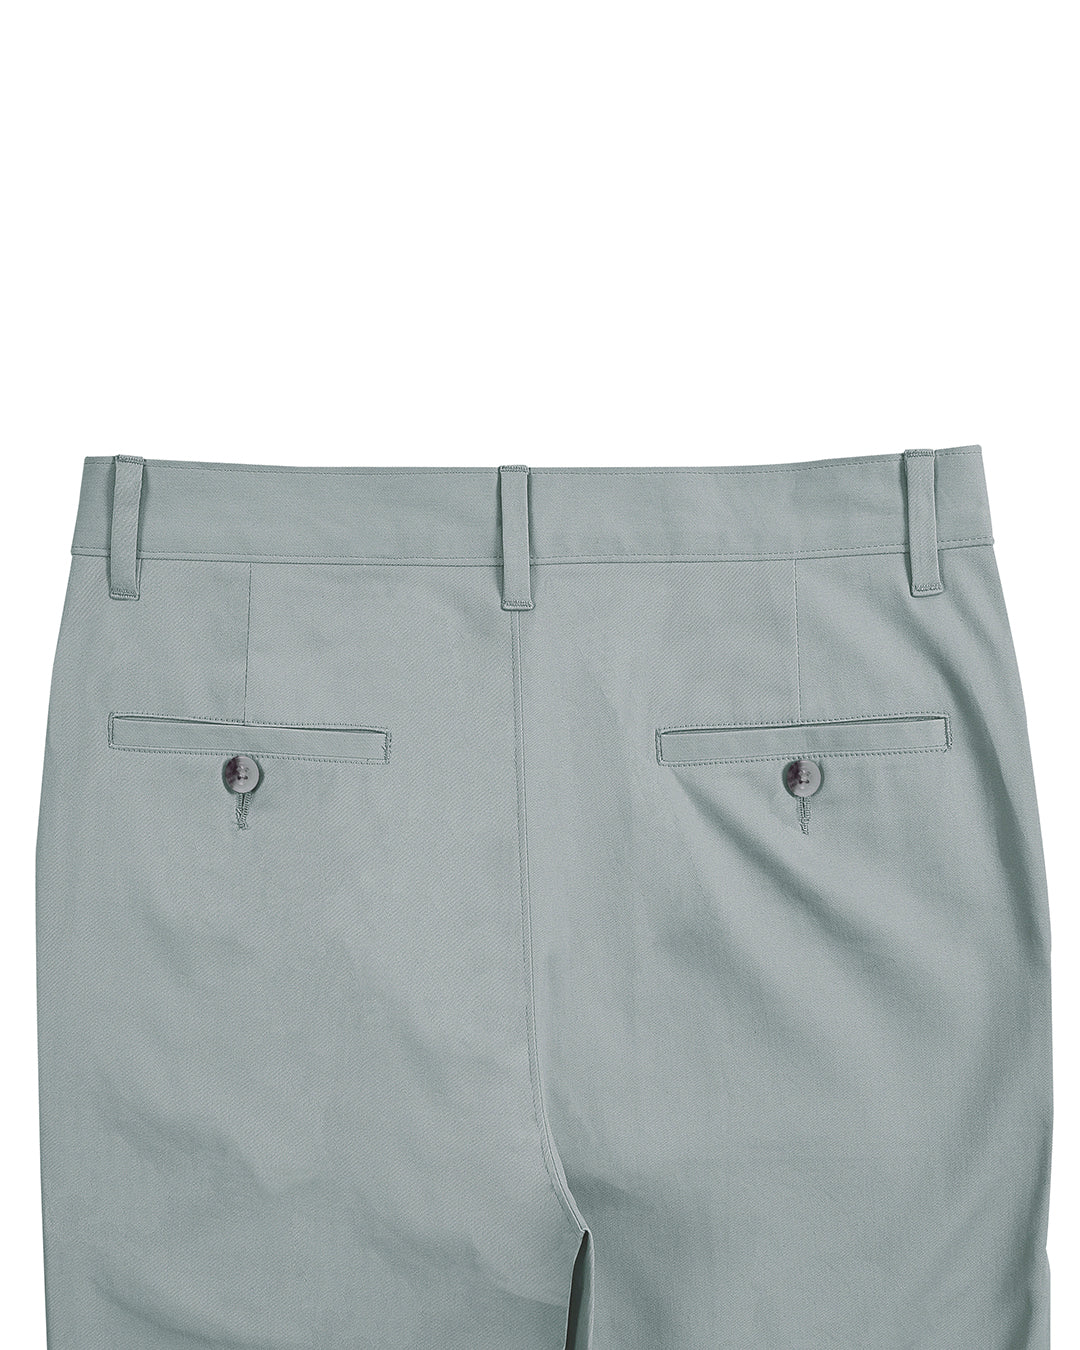 Back view of custom Genoa Chino pants for men by Luxire in sage green